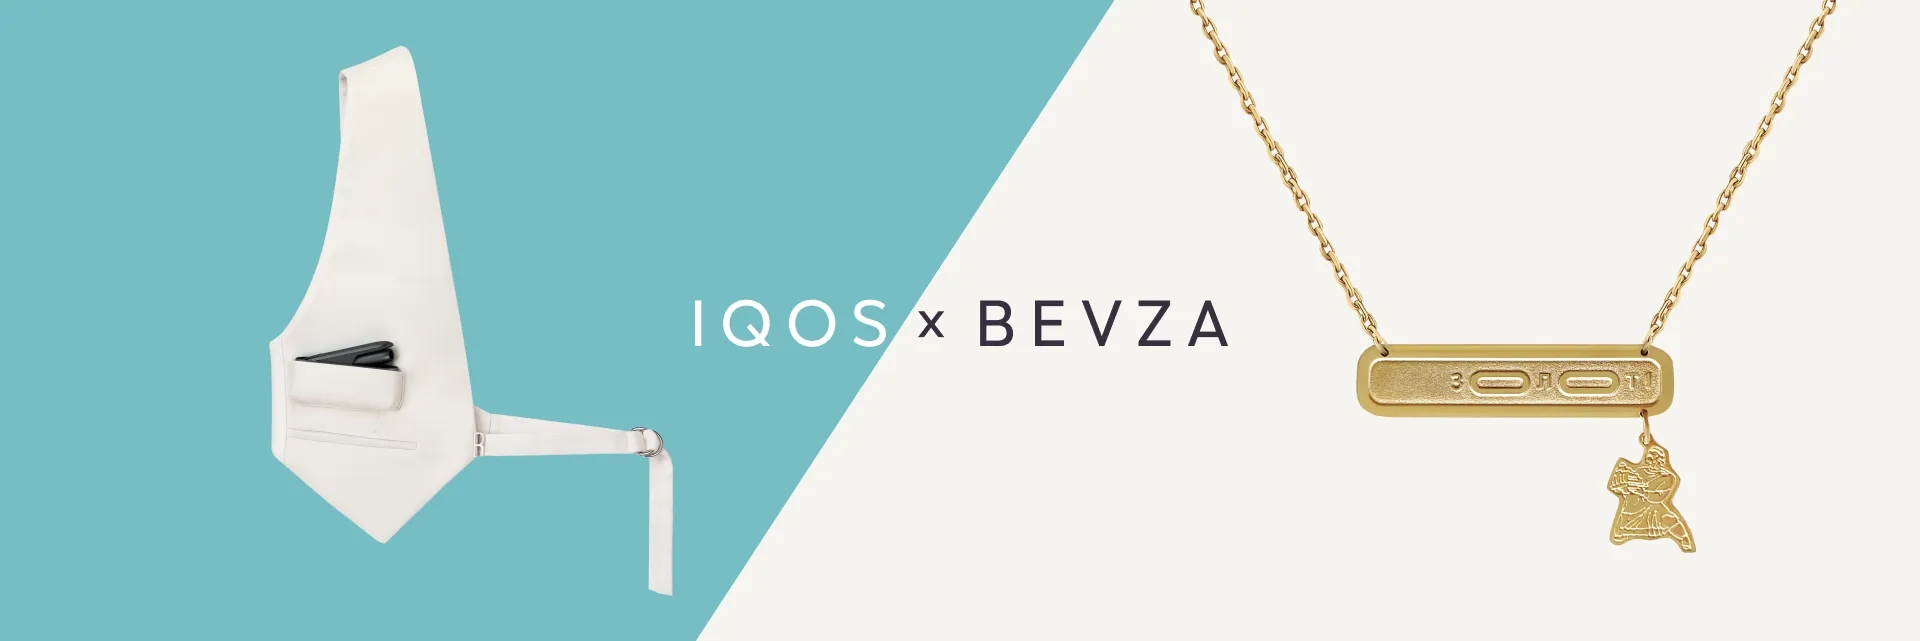 iqos-companion-edition-and-bevza-in-paris-fashion-week